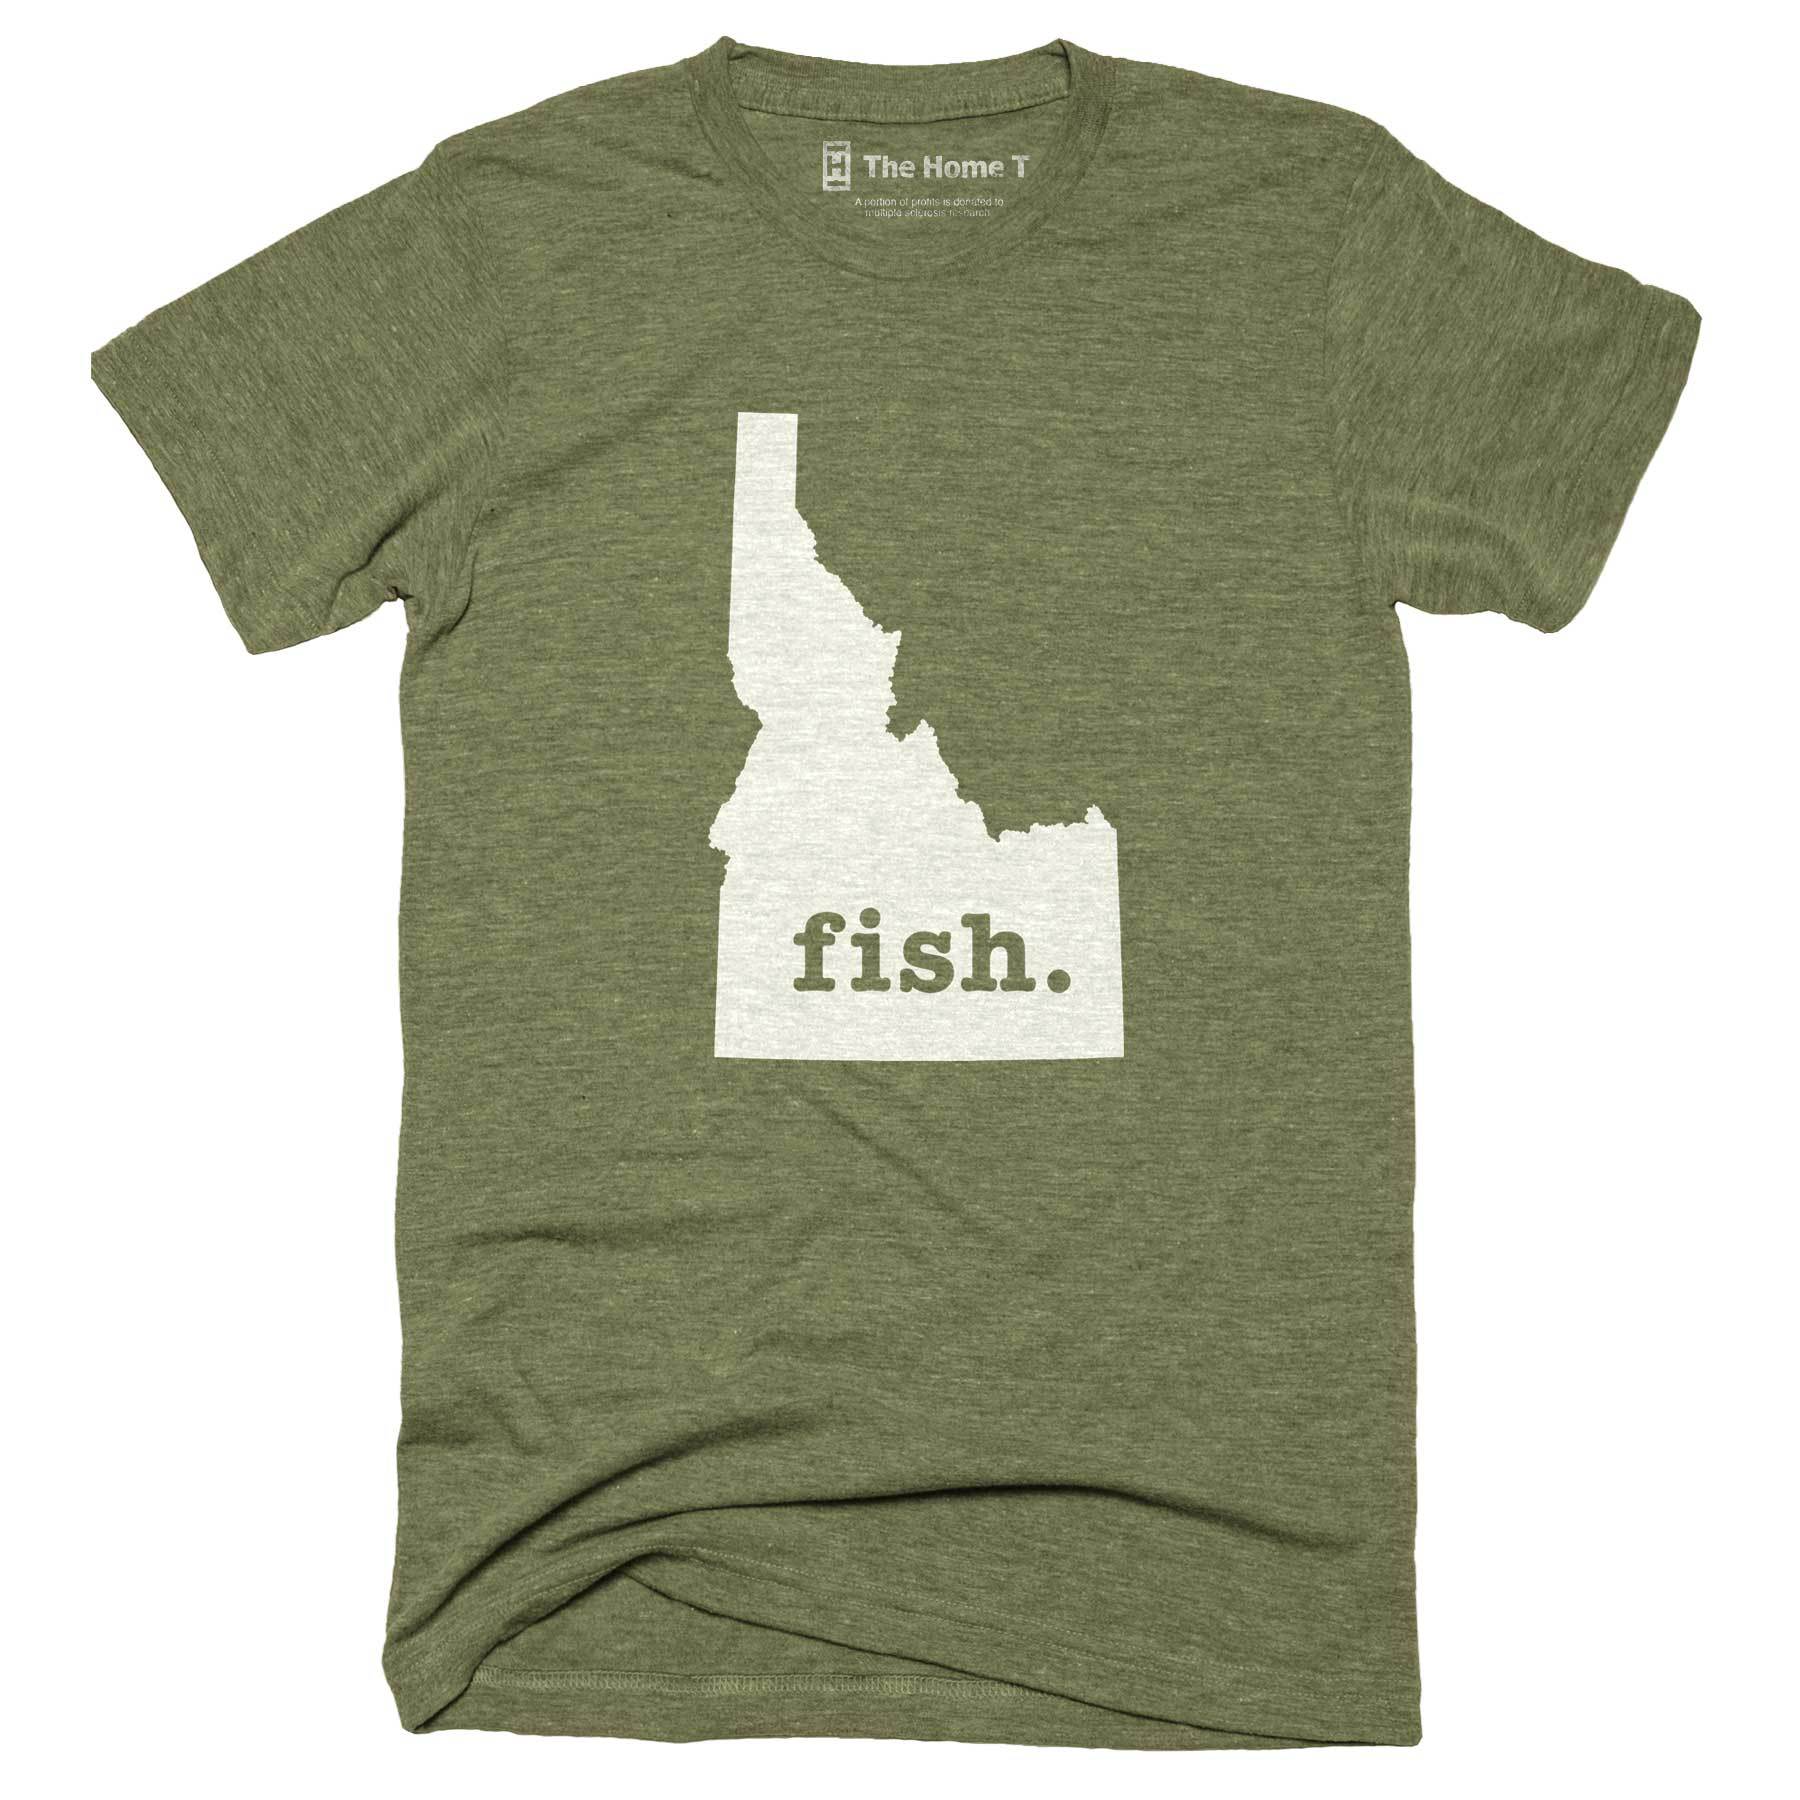 Idaho Fish Home T-Shirt Outdoor Collection The Home T XXL Army Green